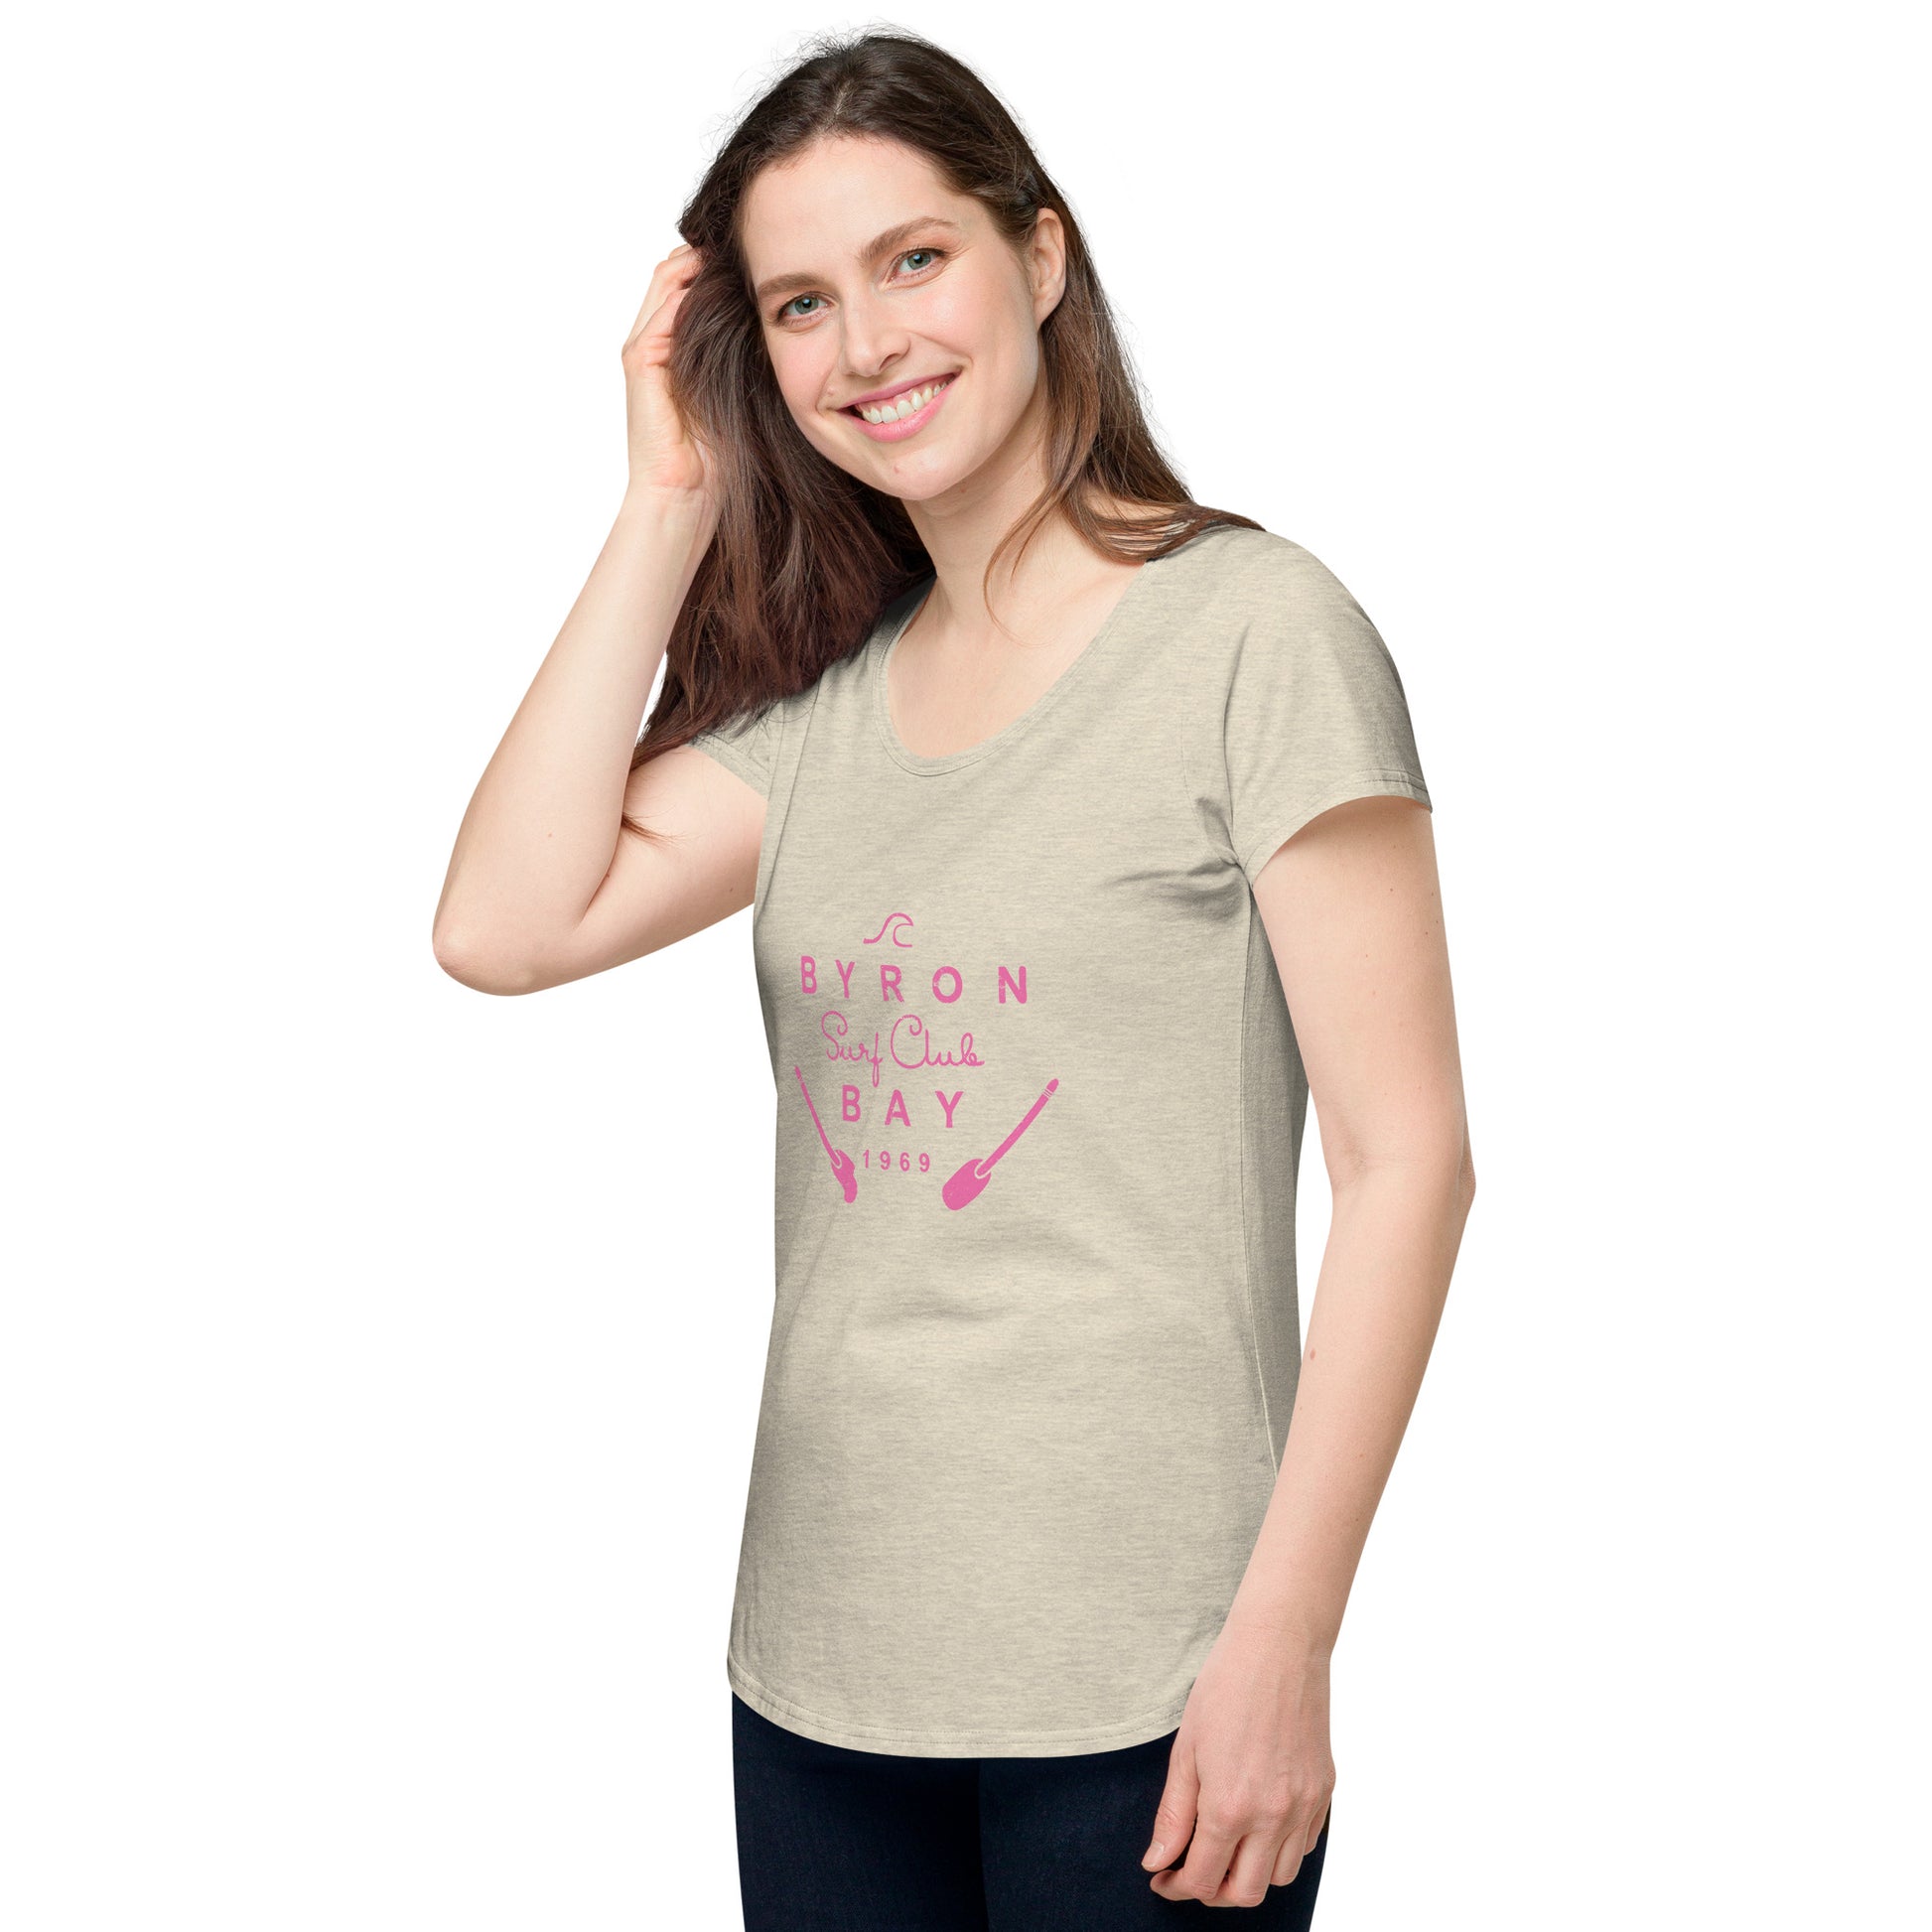  Women’s Round Neck Tee - Oatmeal - side view, on woman standing with one hand touching hair - pink Byron Bay Surf Club logo on front - Genuine Byron Bay Merchandise | Produced by Go Sea Kayak Byron Bay 